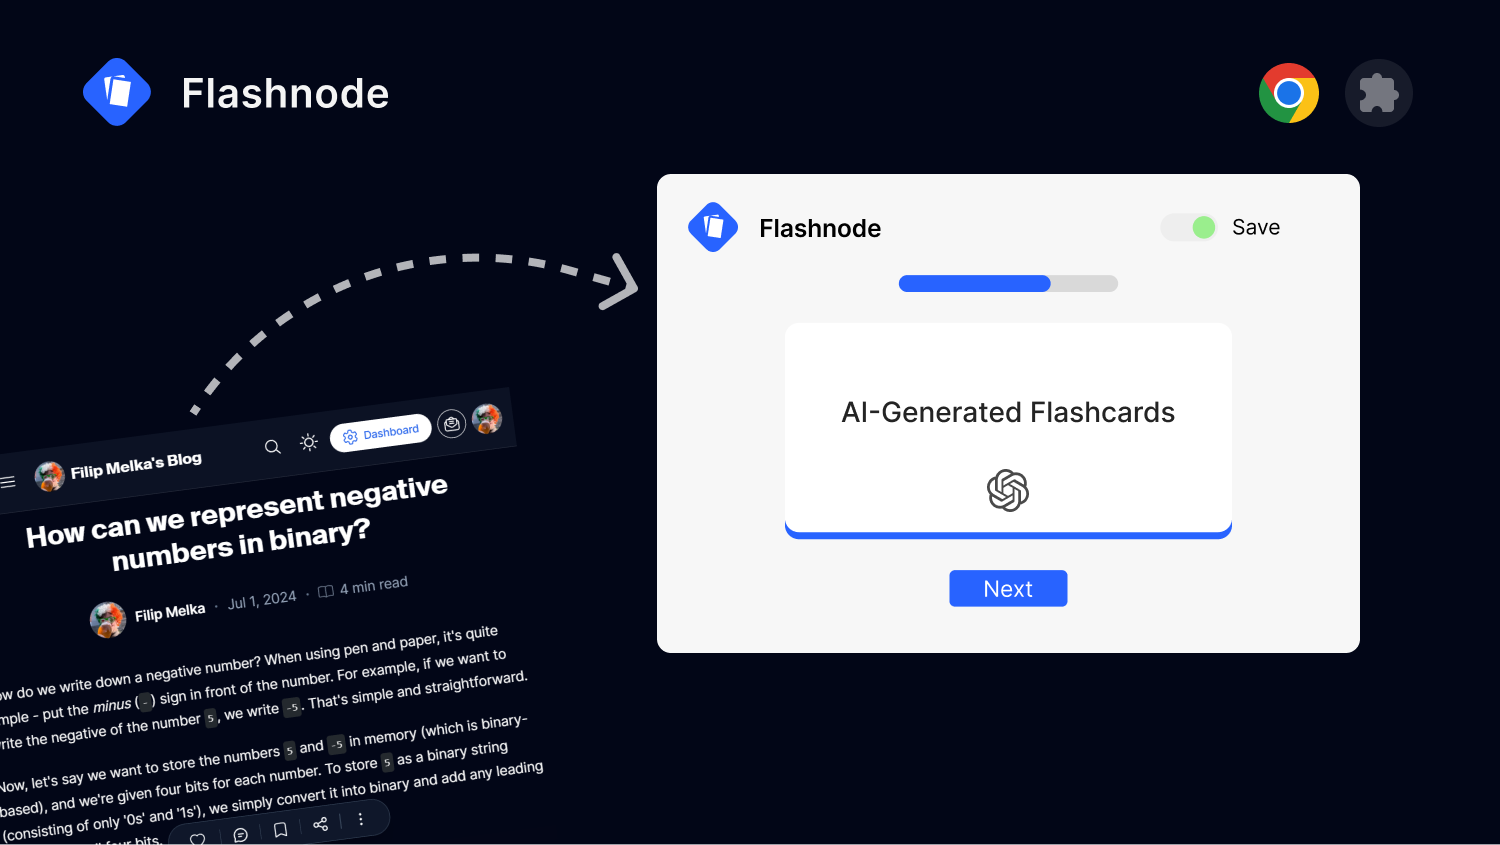 Introducing Flashnode: AI-Powered Flashcards for Hashnode Articles